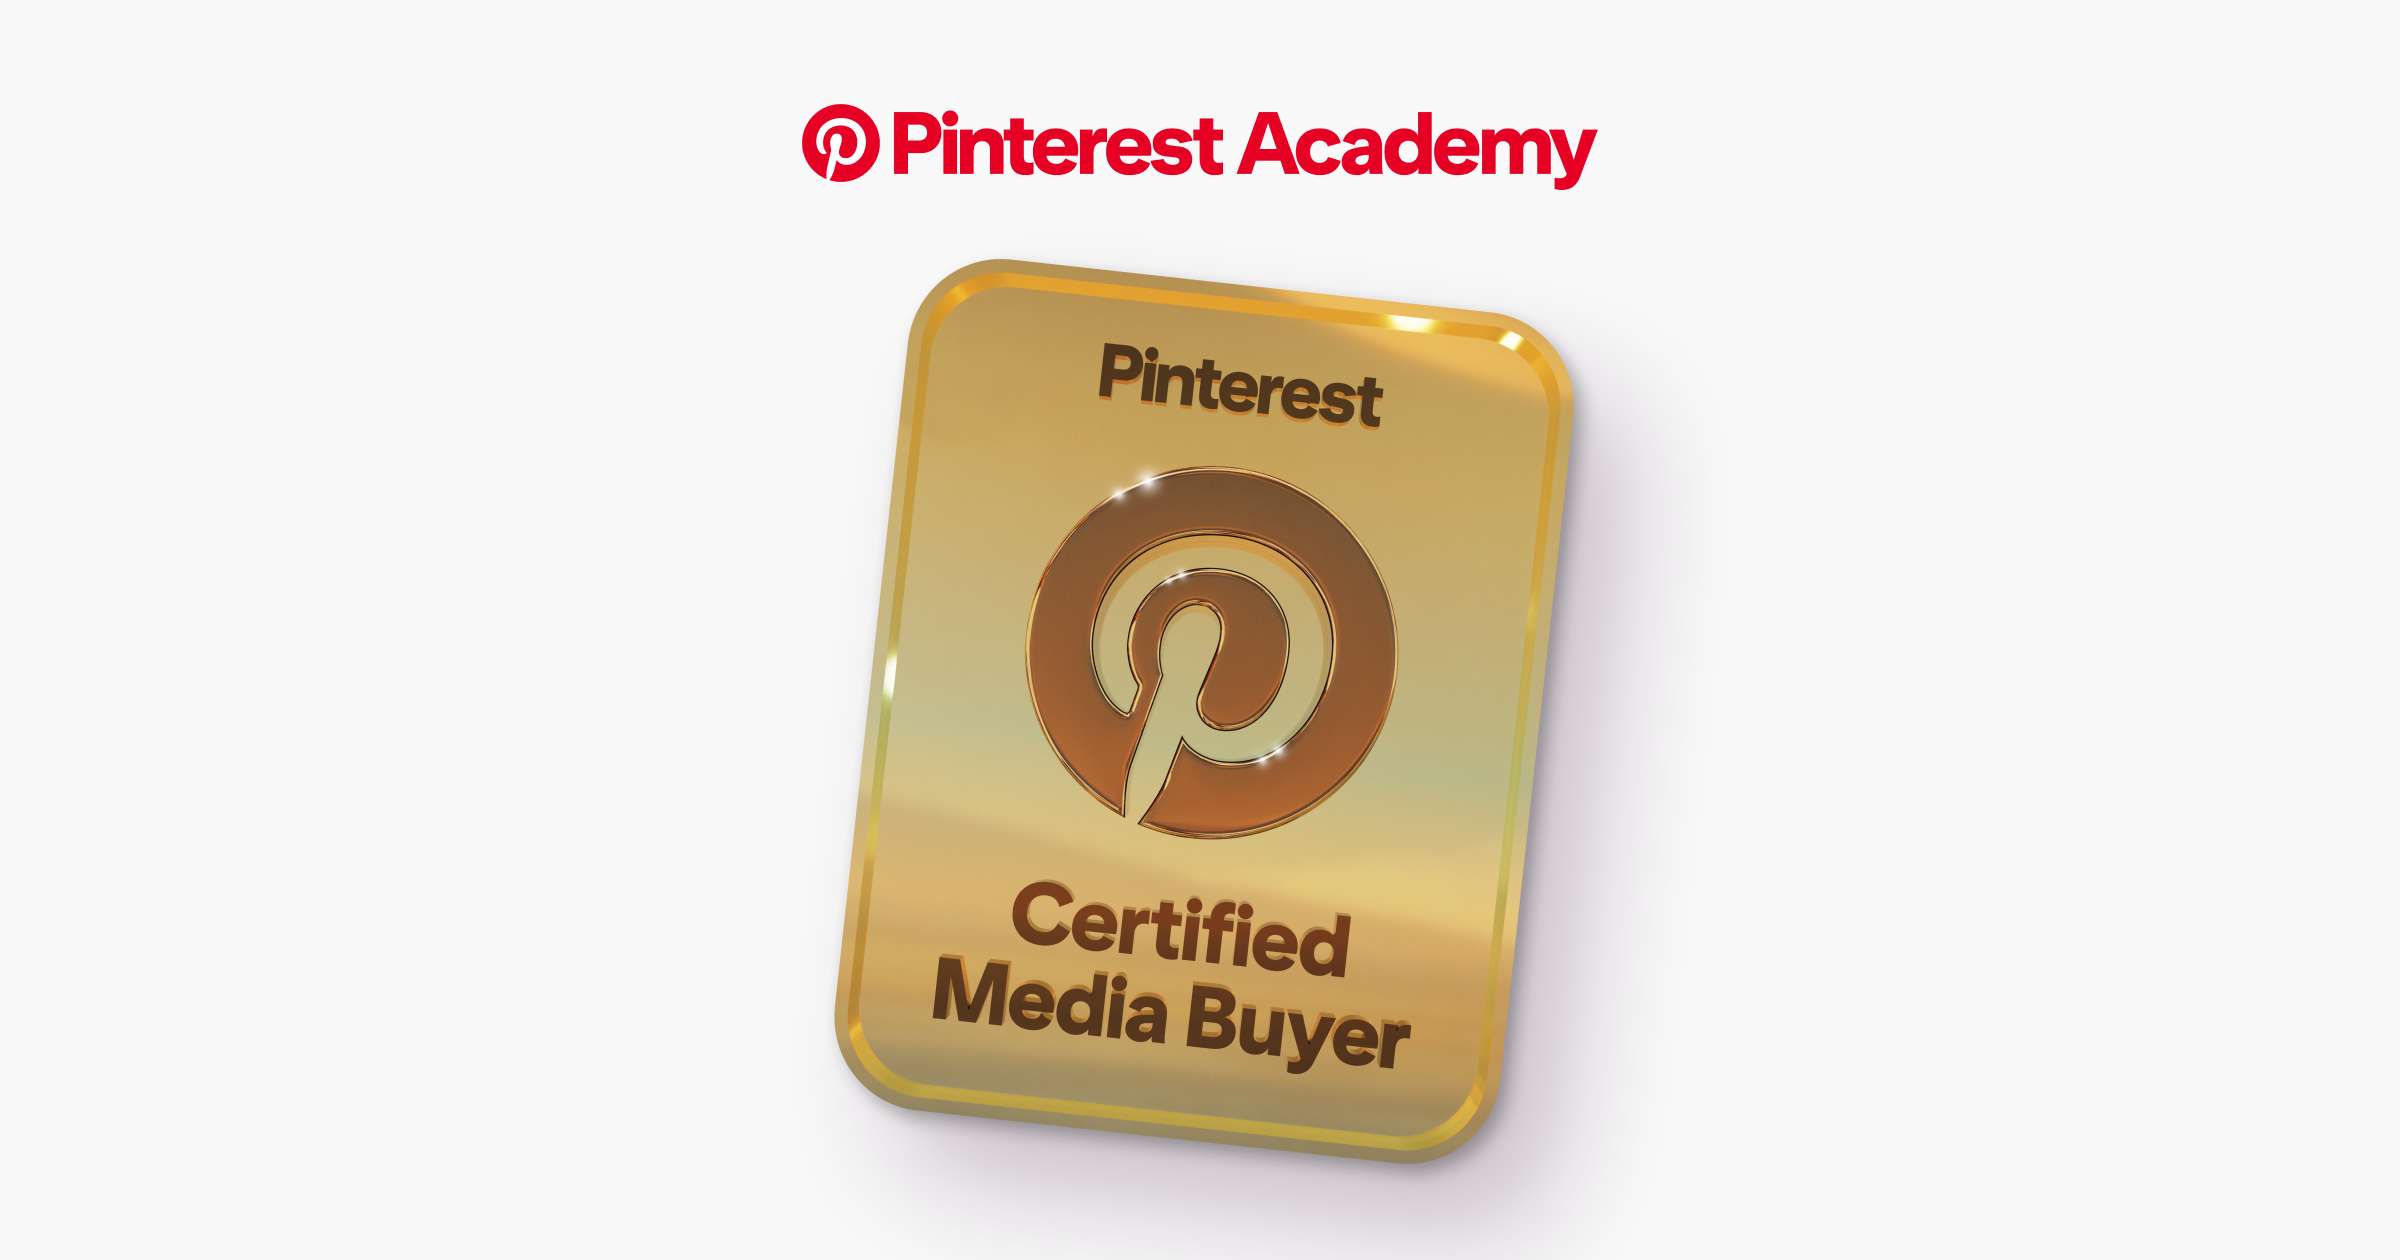 Pinterest Introduces "Media Buyer" Certification Course